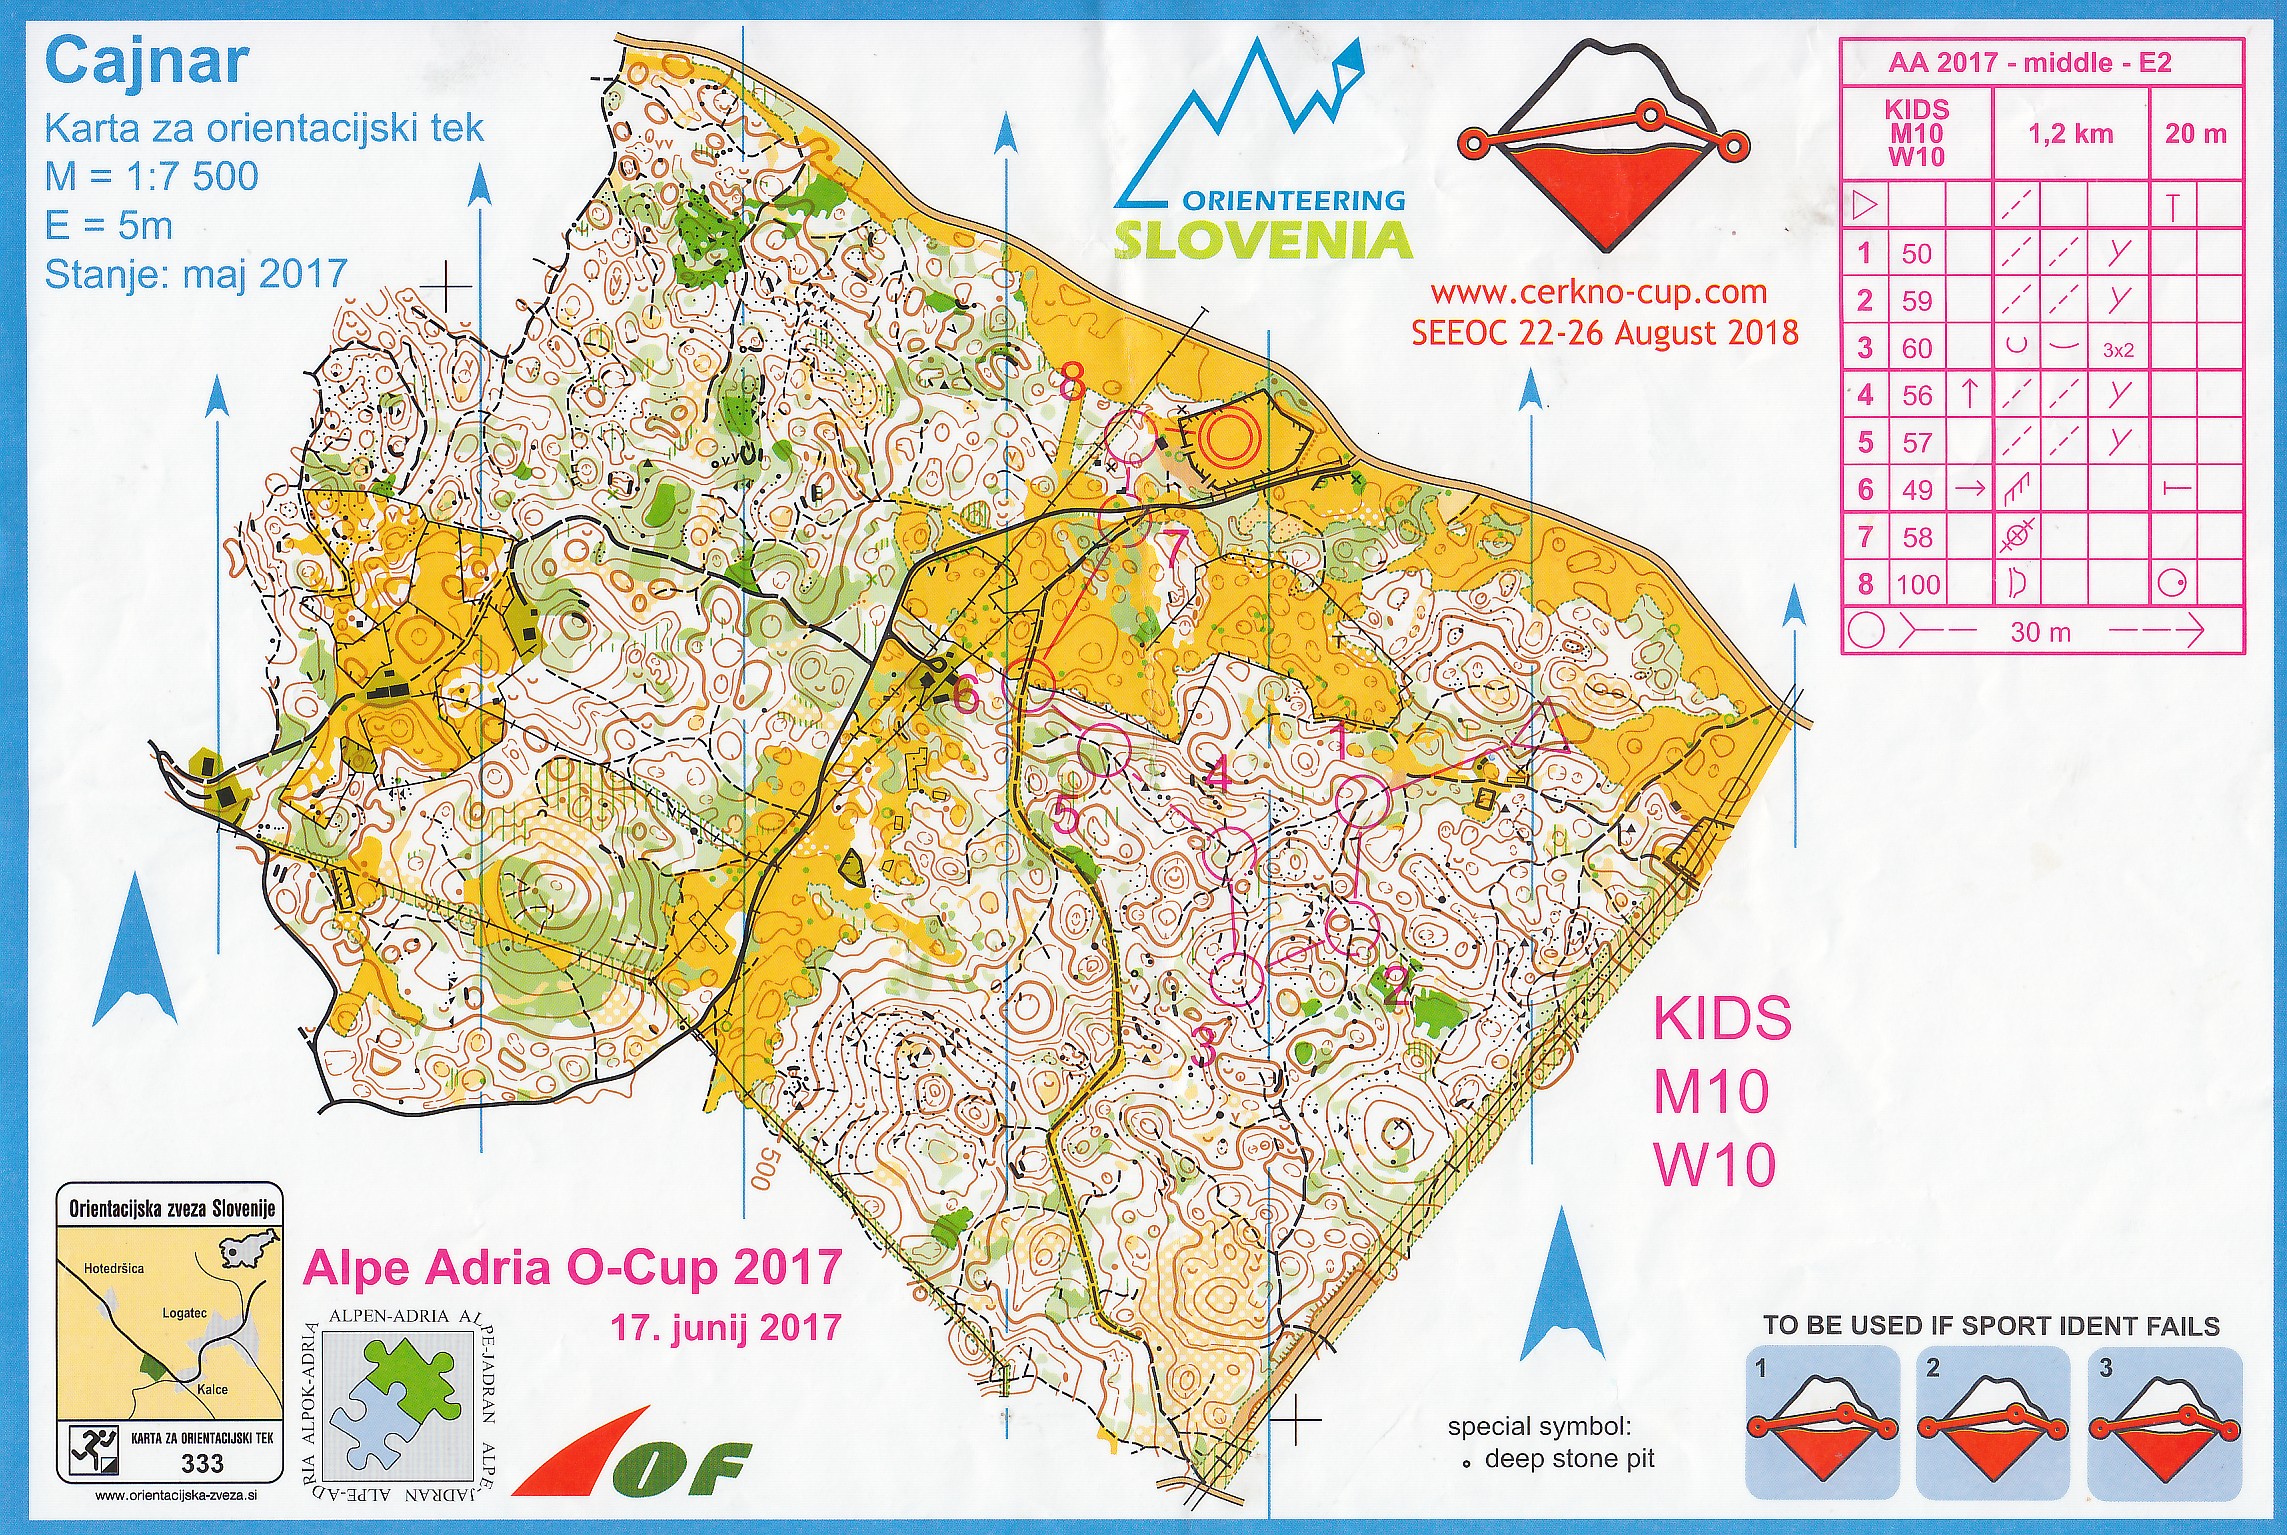 Alpe Adria Orienteering Cup 2017 - Middle (17-06-2017)